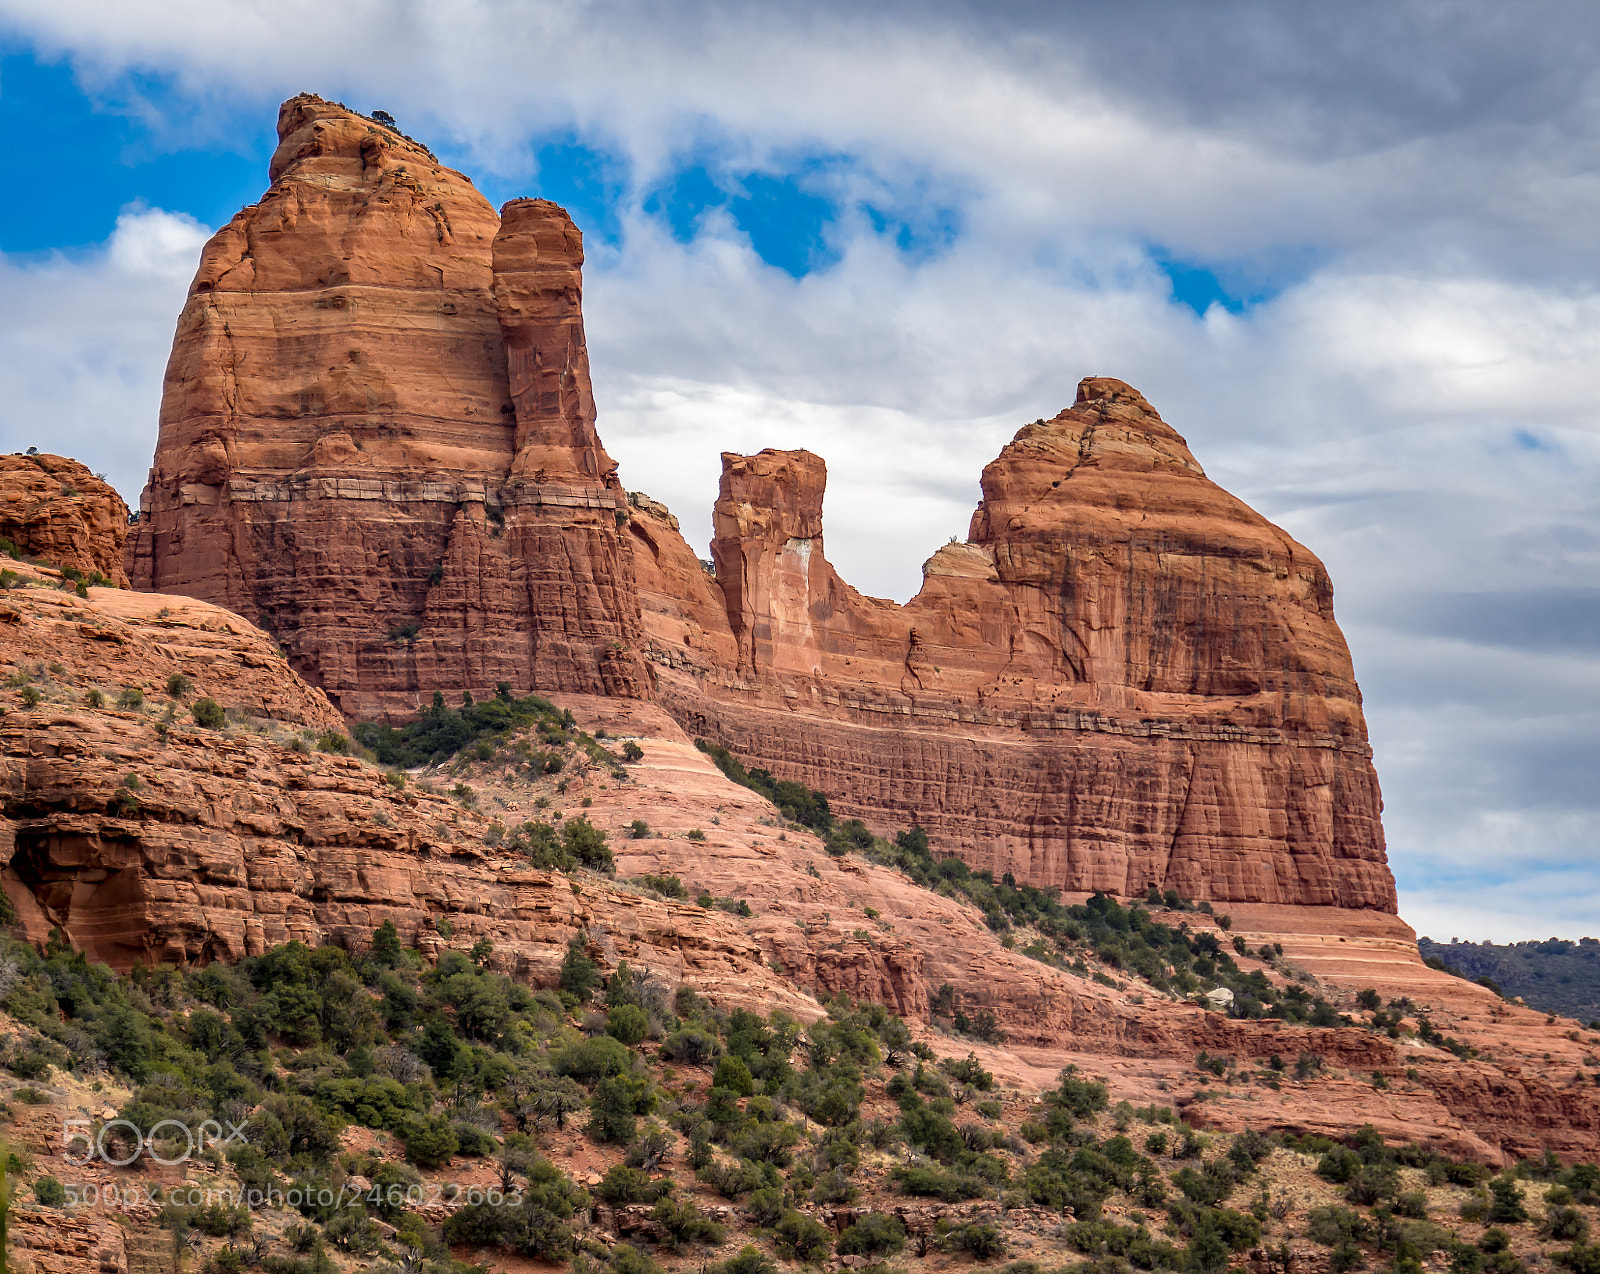 Sony a6000 sample photo. Scenic cathedral rock formation photography